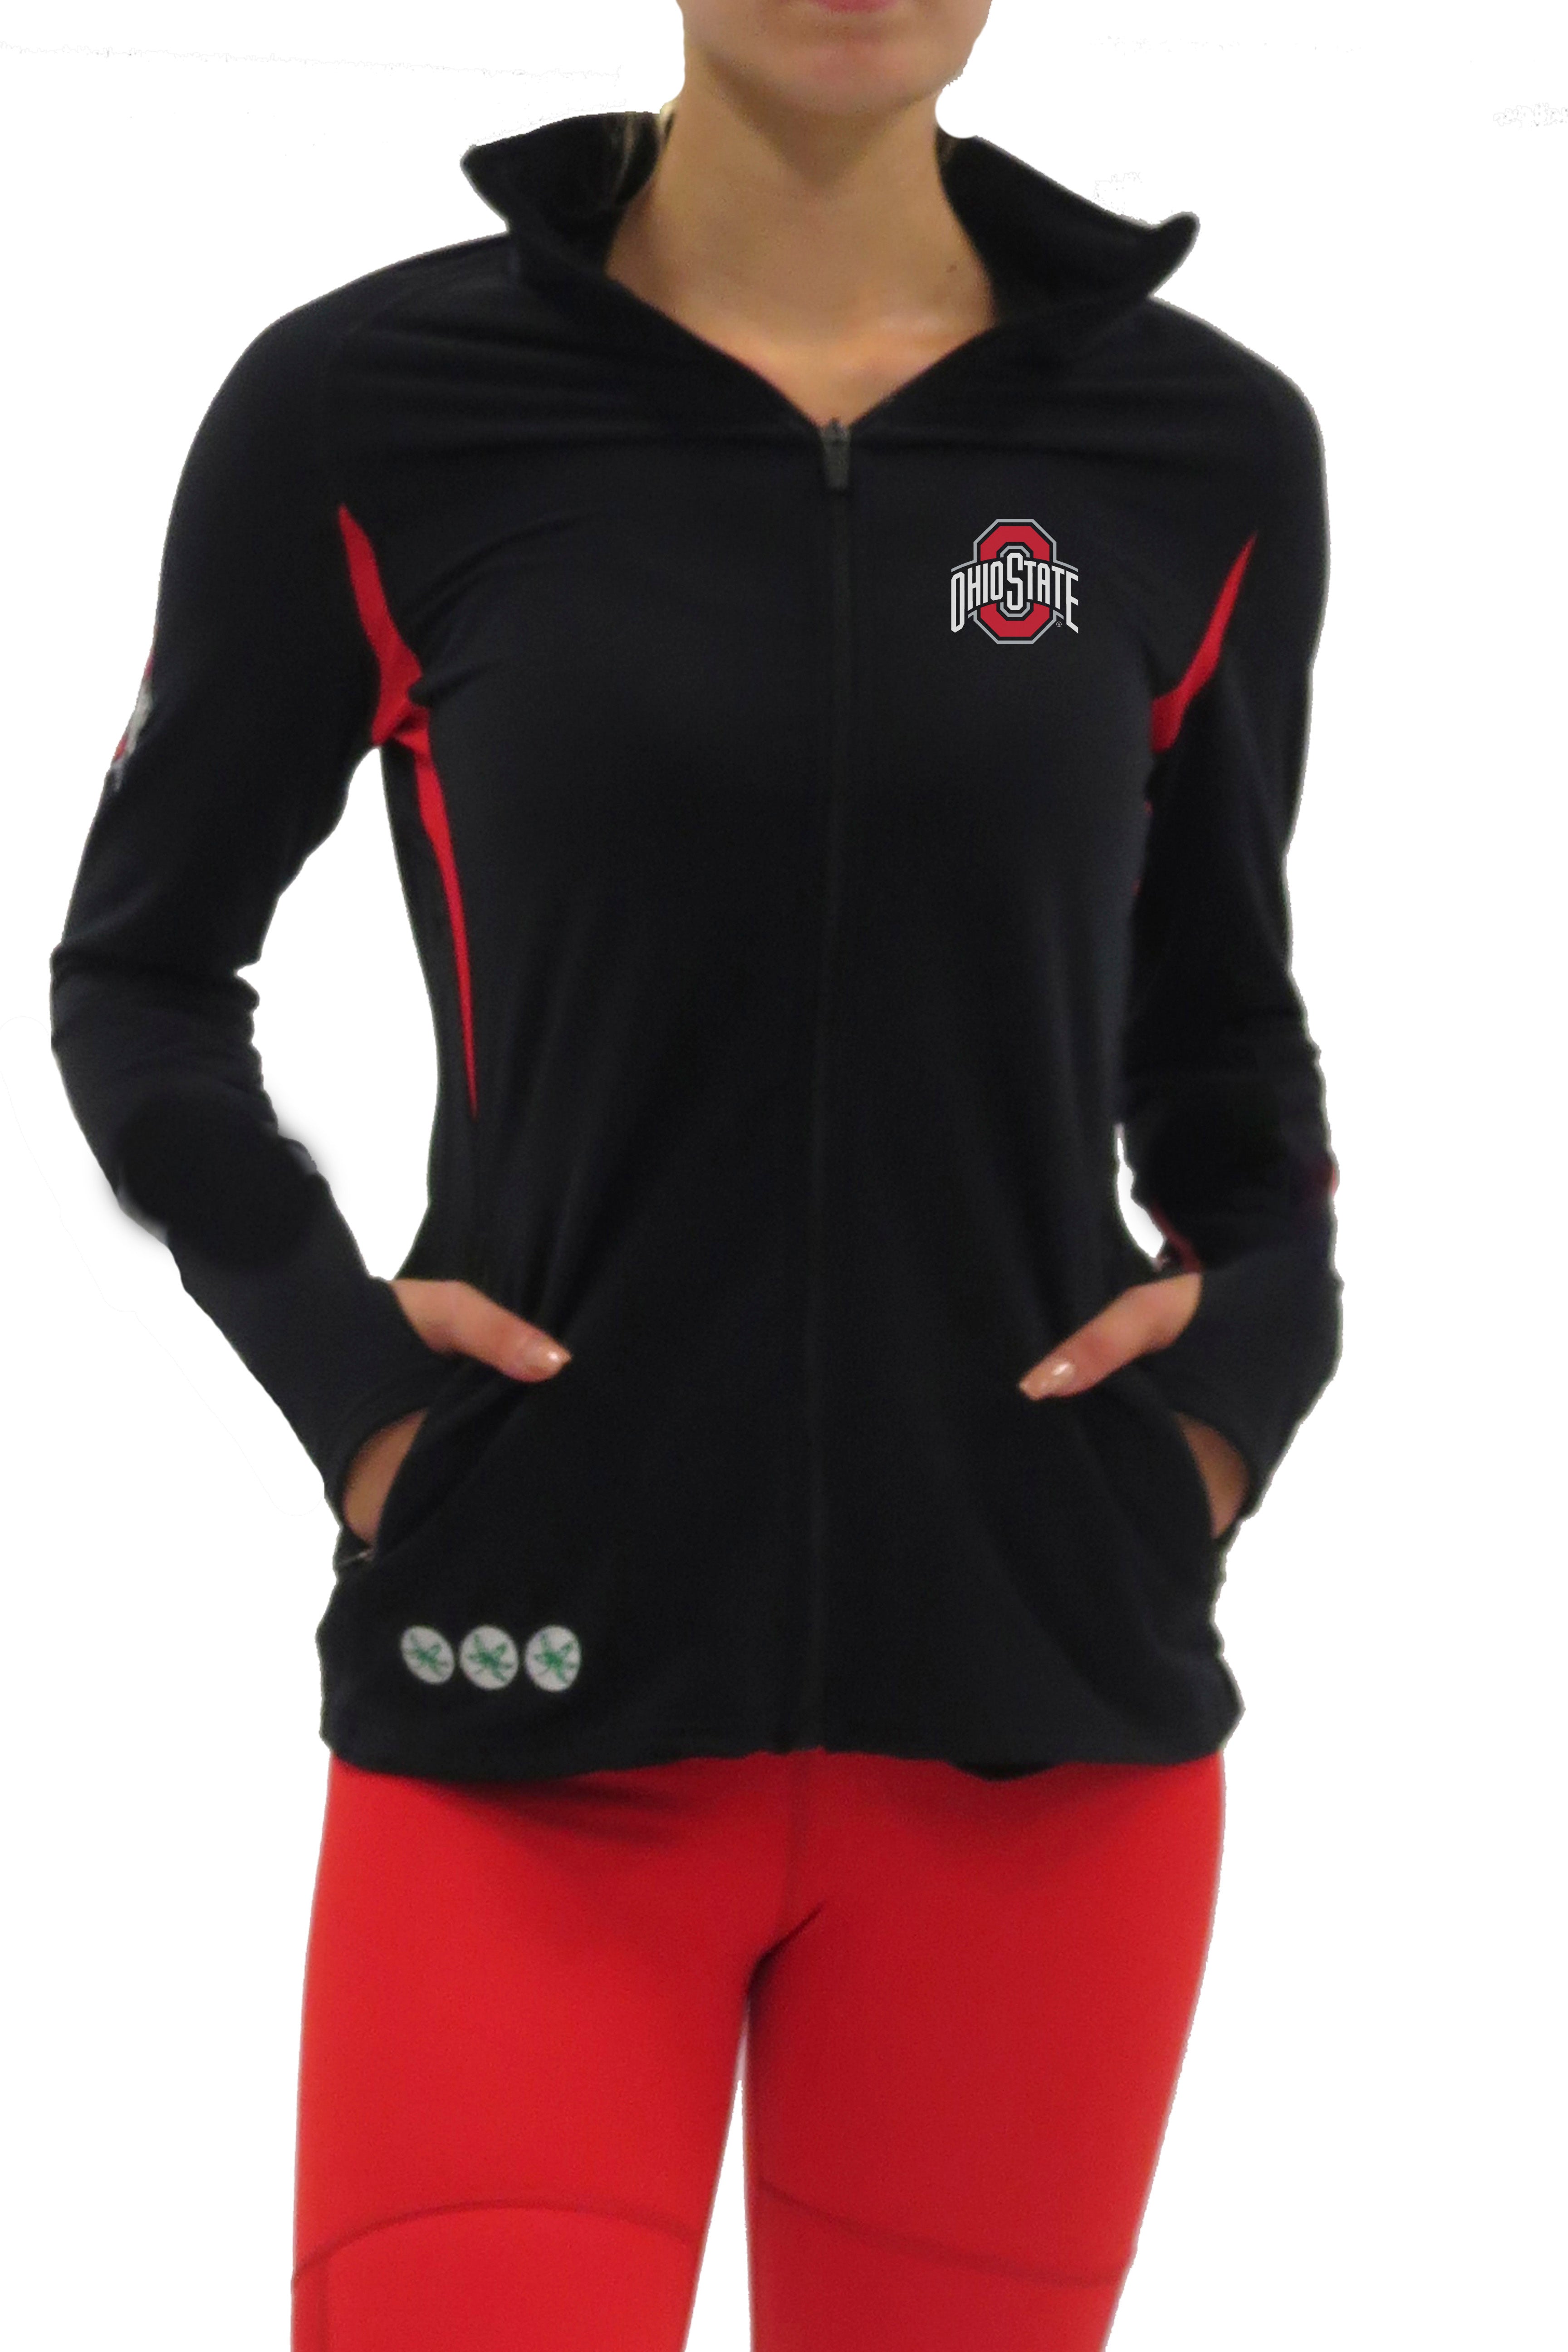 2102 - The Ohio State University Luxe Full Zip Gameday Pullover/Black